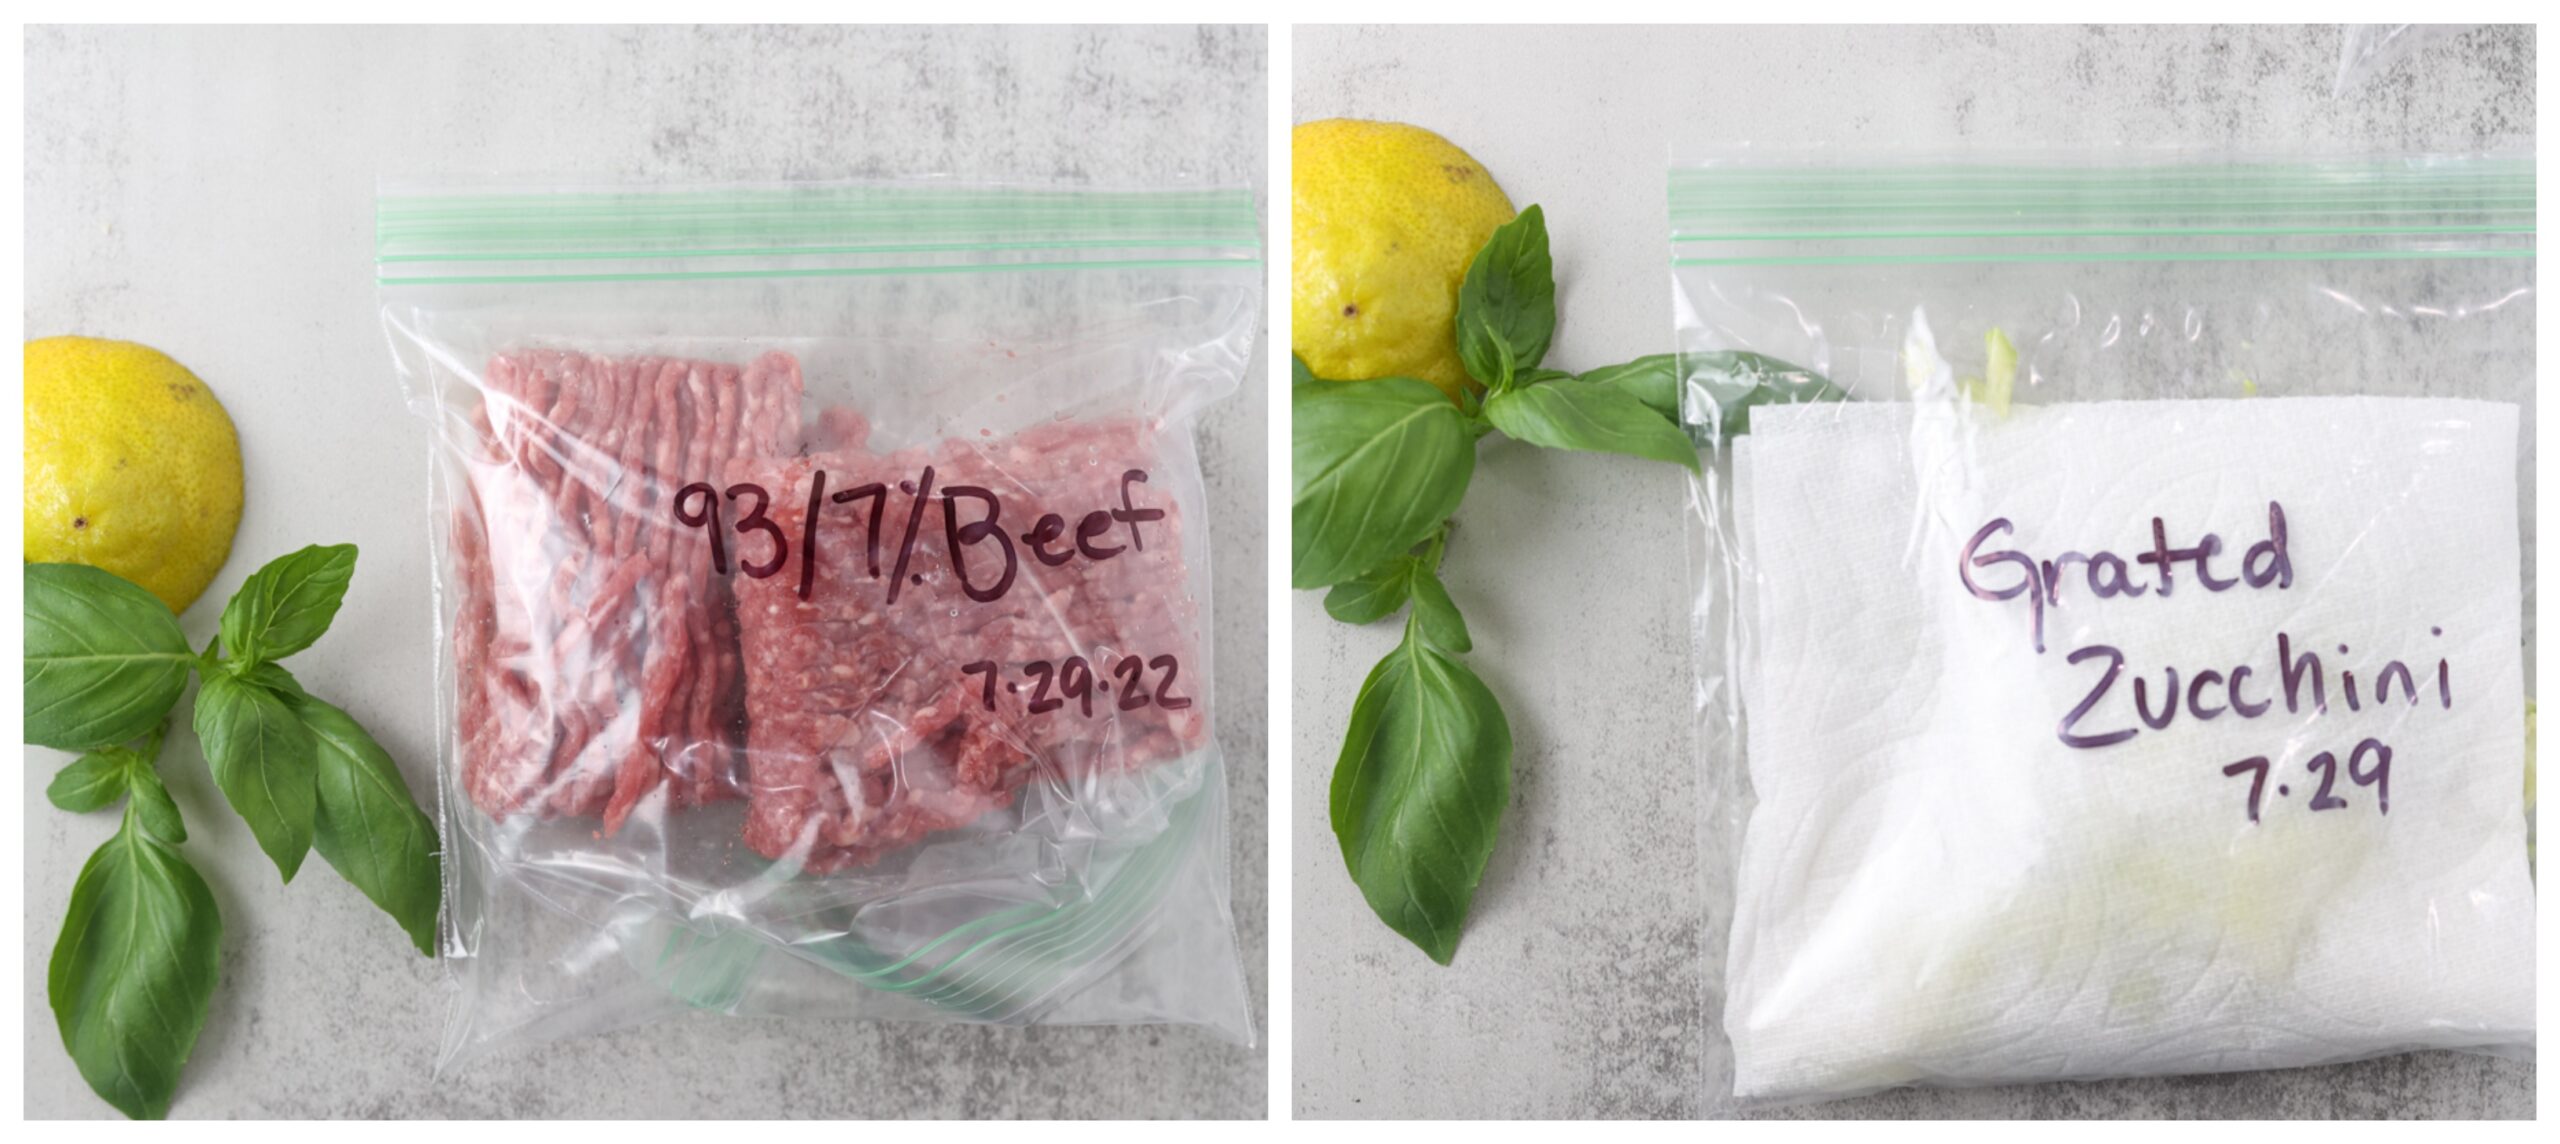 Side by side image of ground beef labeled in bag and zucchini labeled in bag for food storage.